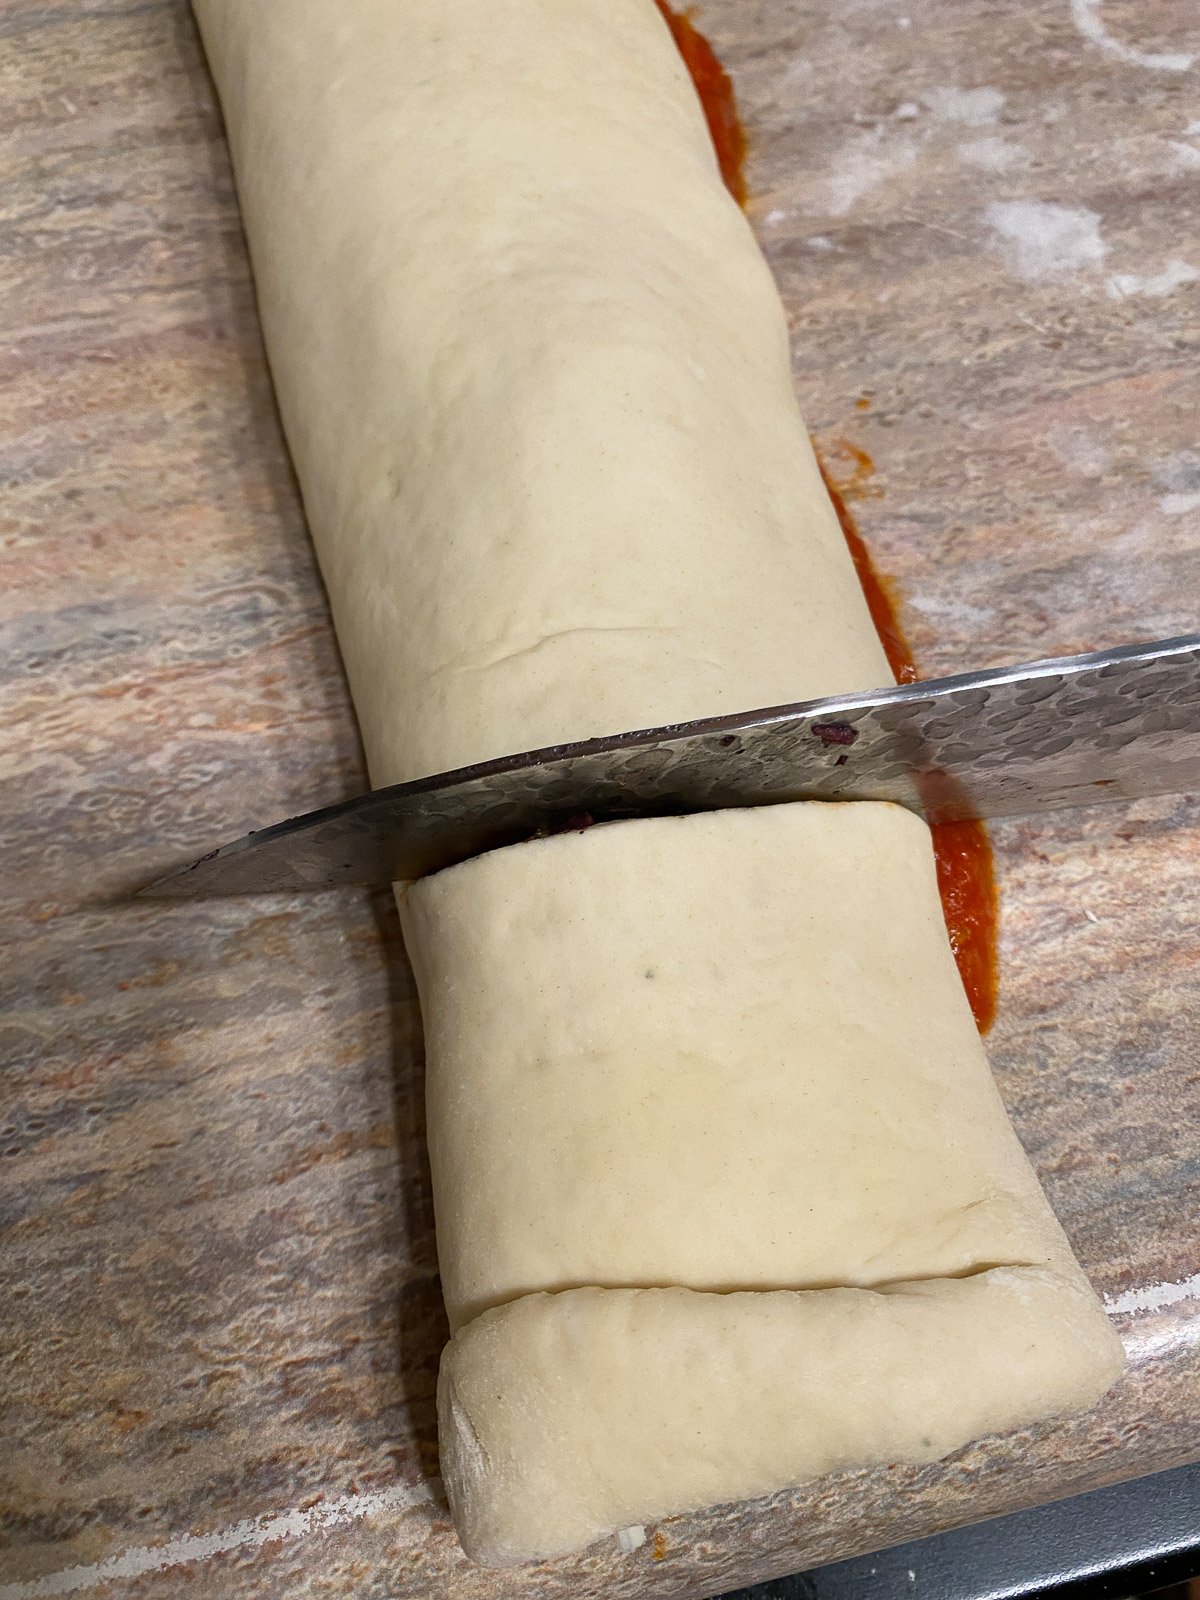 process of cutting pizza into rolls with a cutting knife